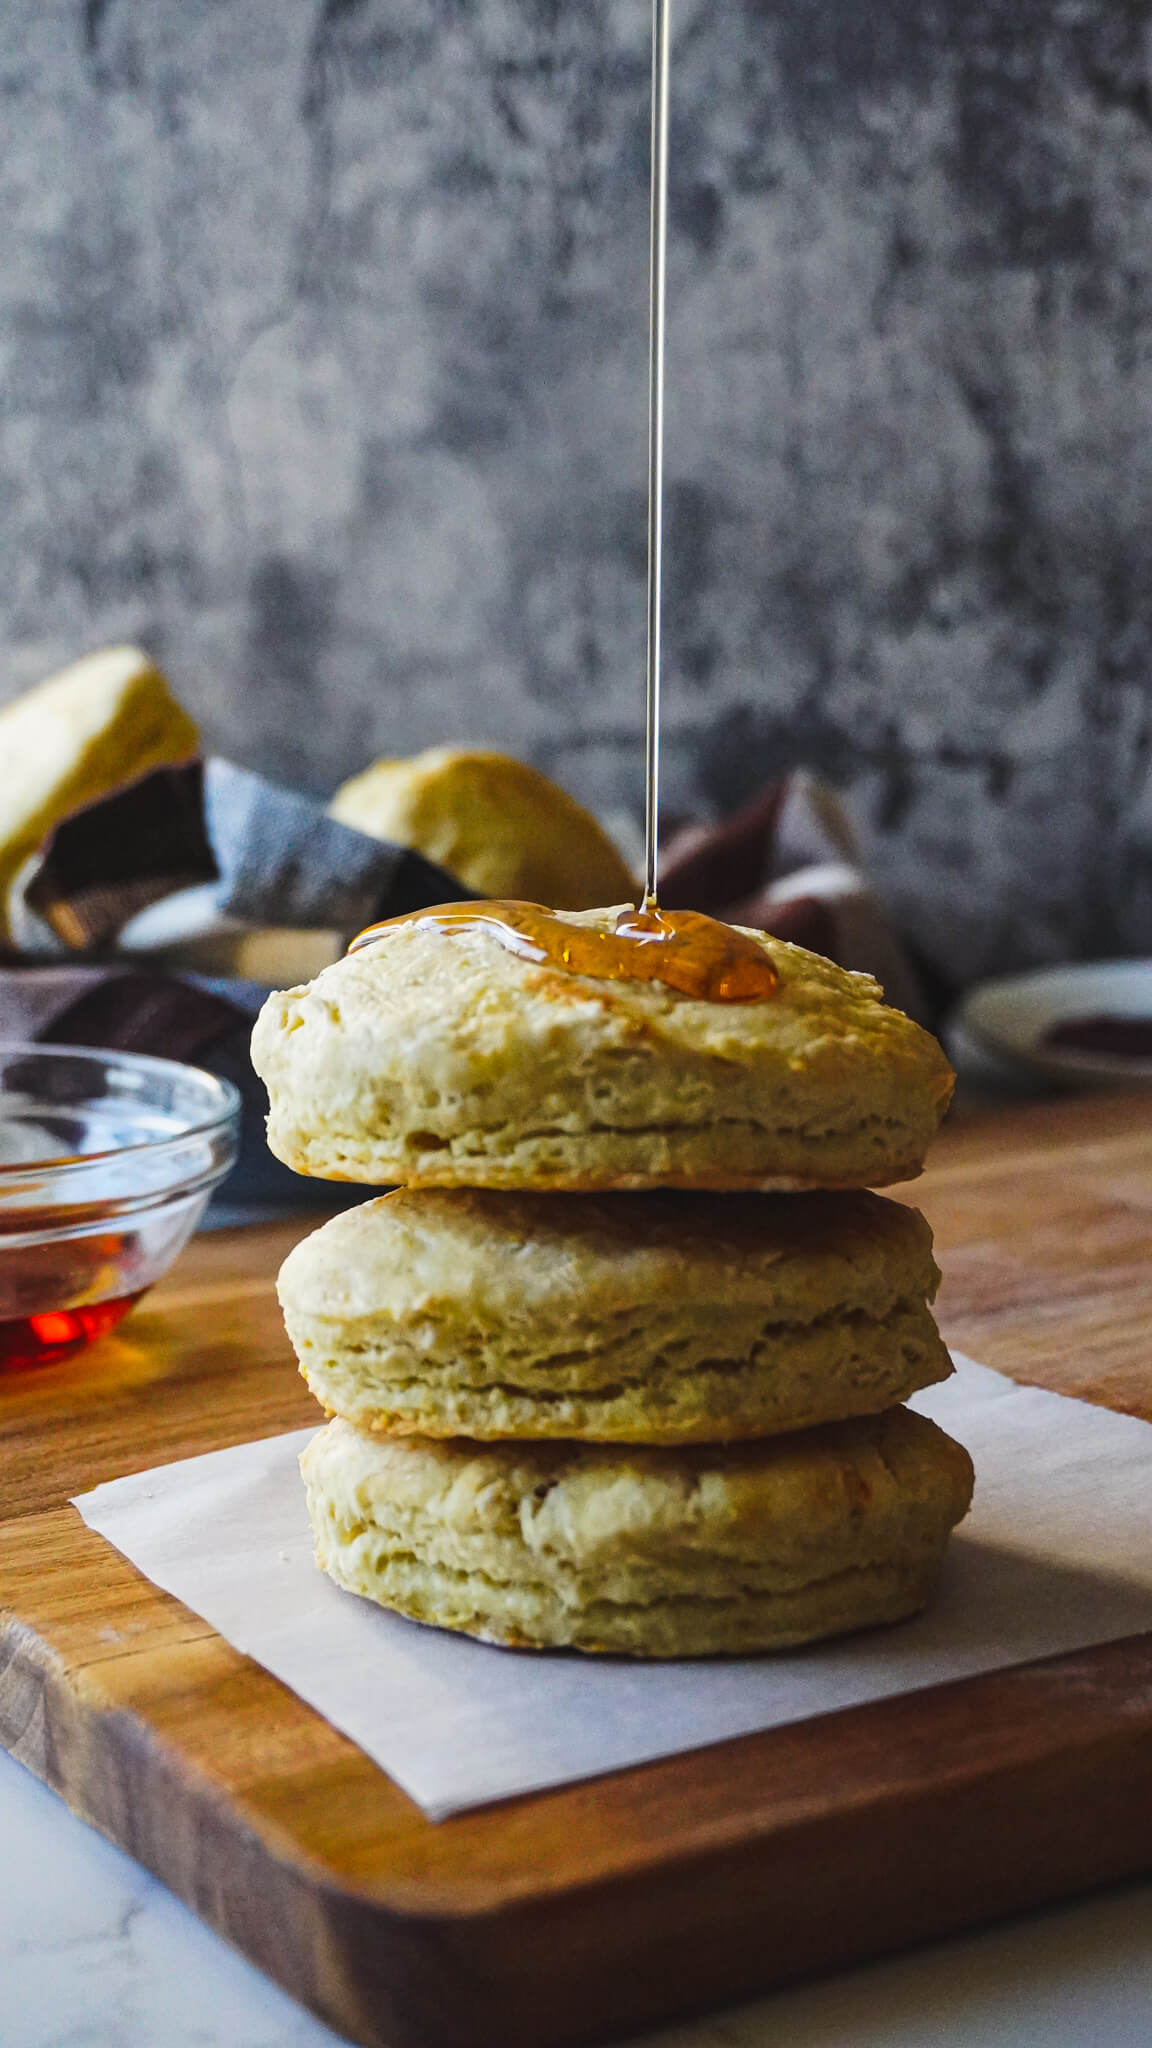 Honey drizzled over almond milk biscuits